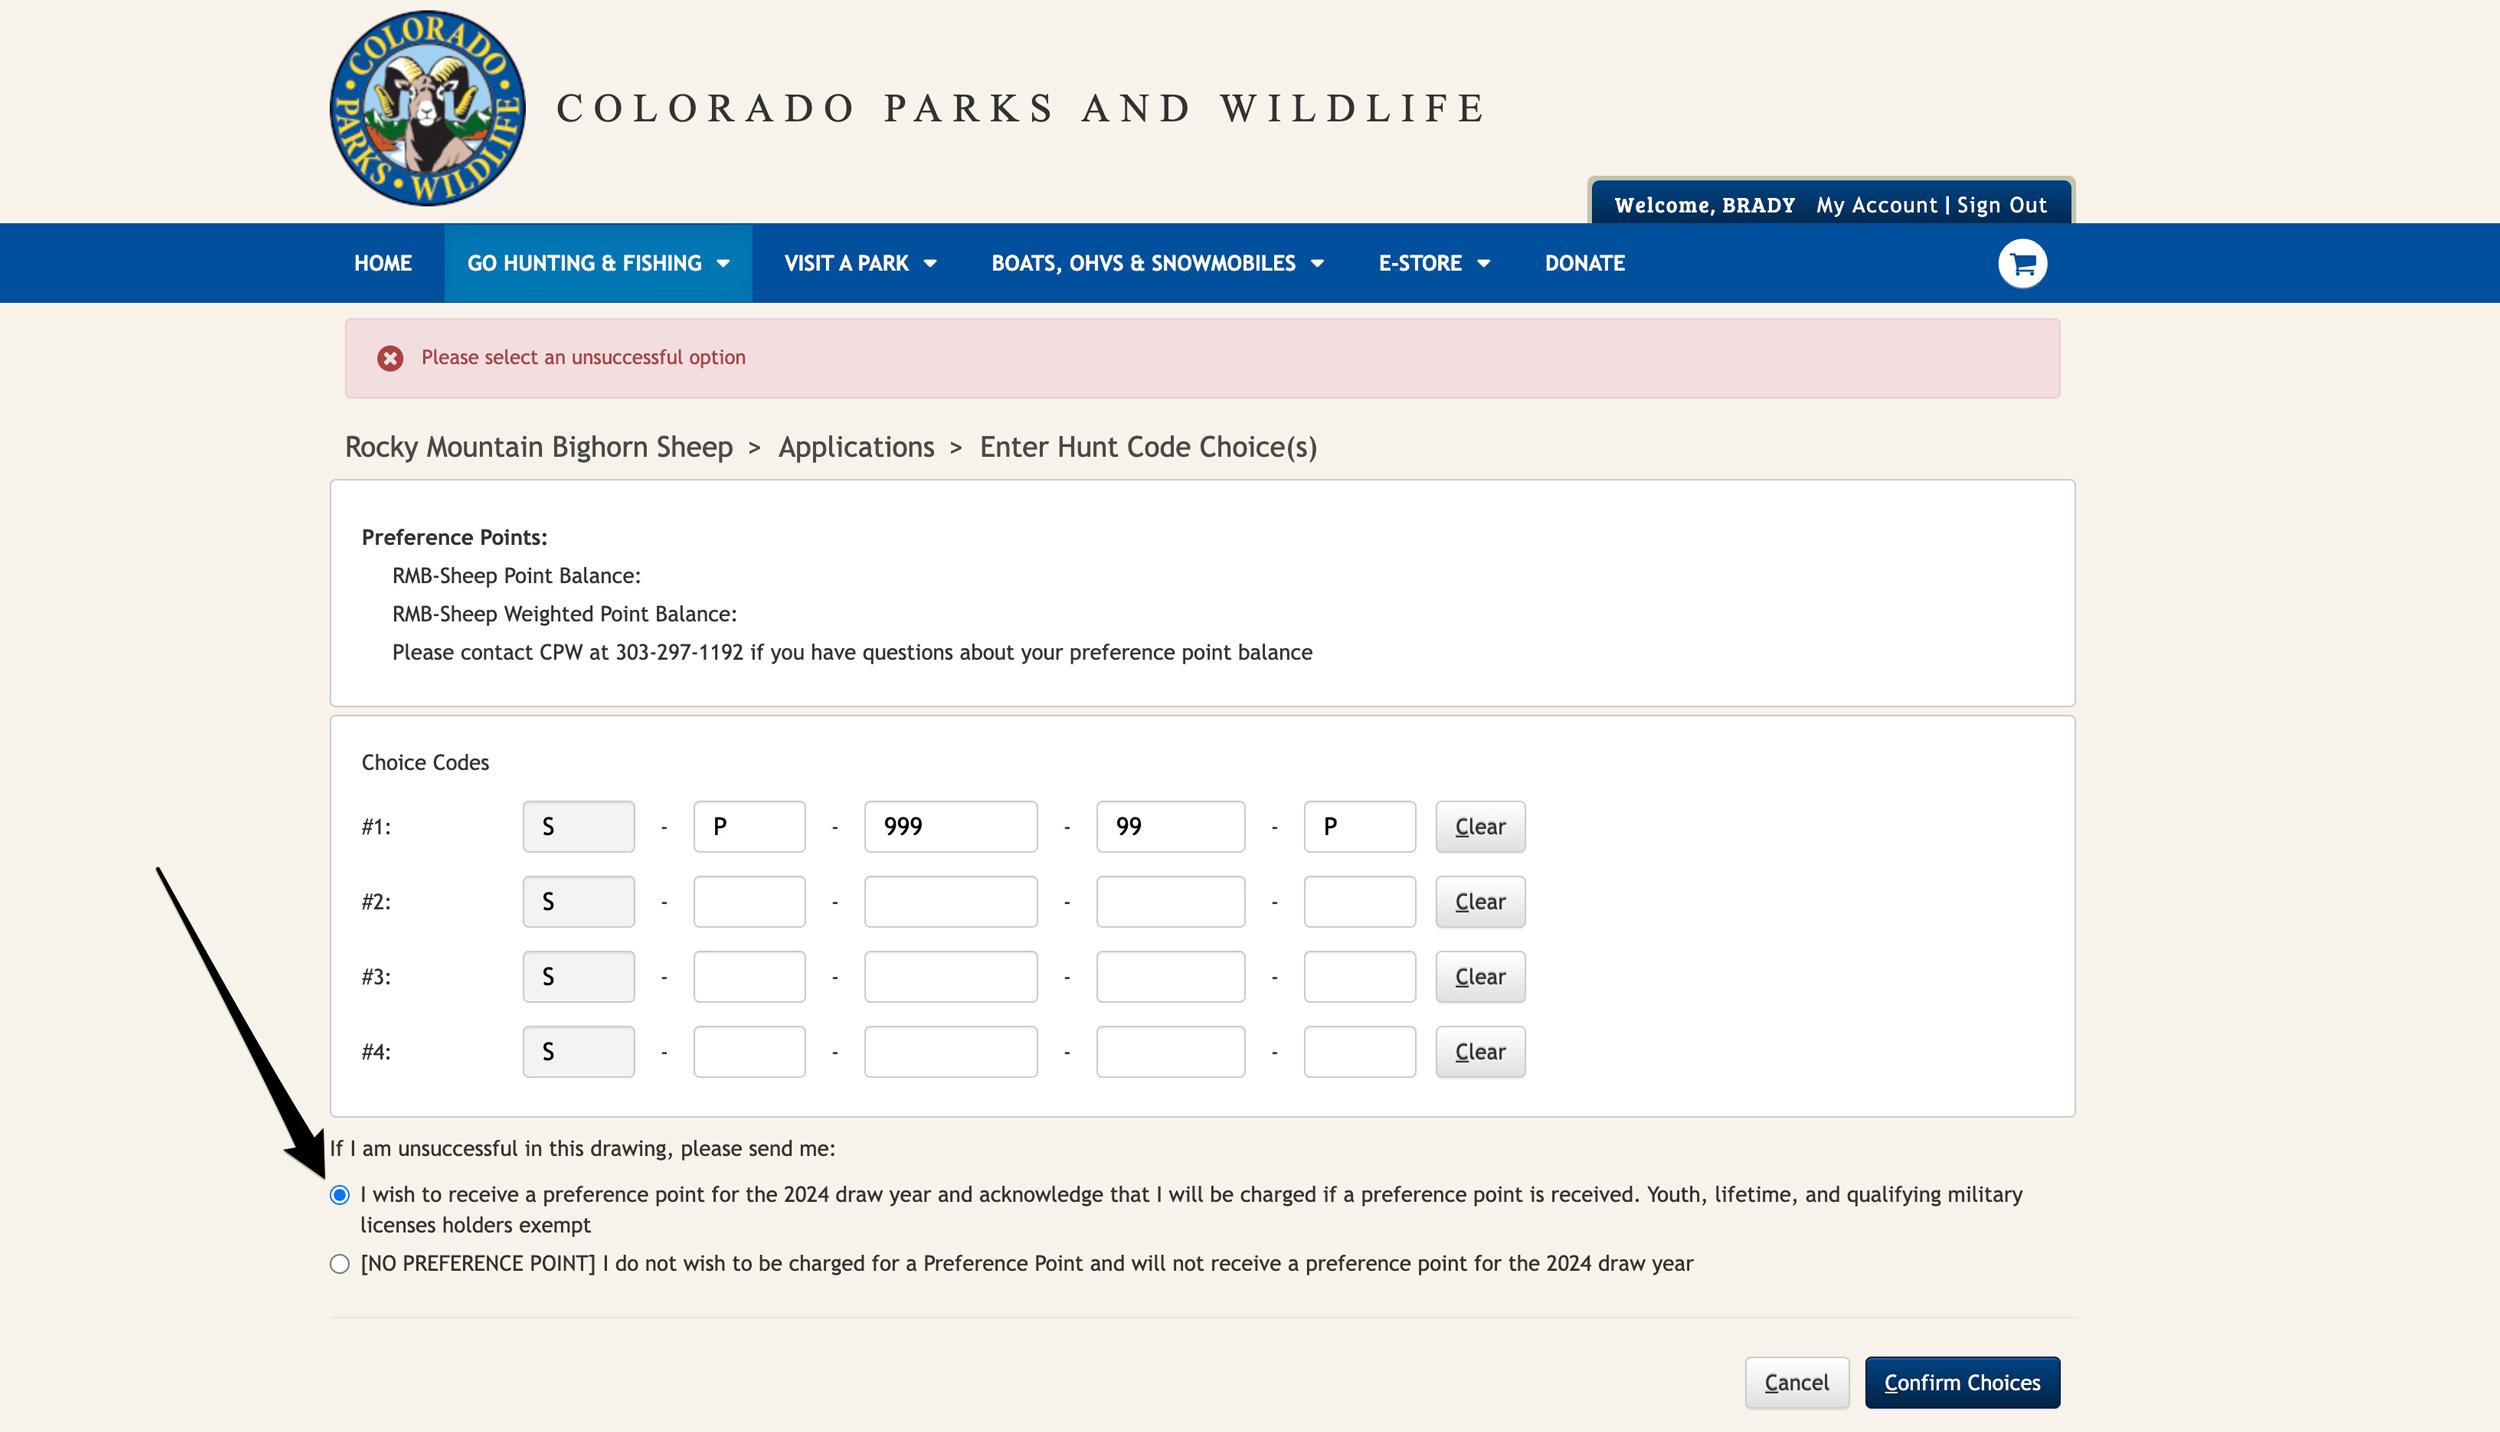 Opt in for purchasing rocky mountain bighorn sheep, moose and mountain goat points in Colorado